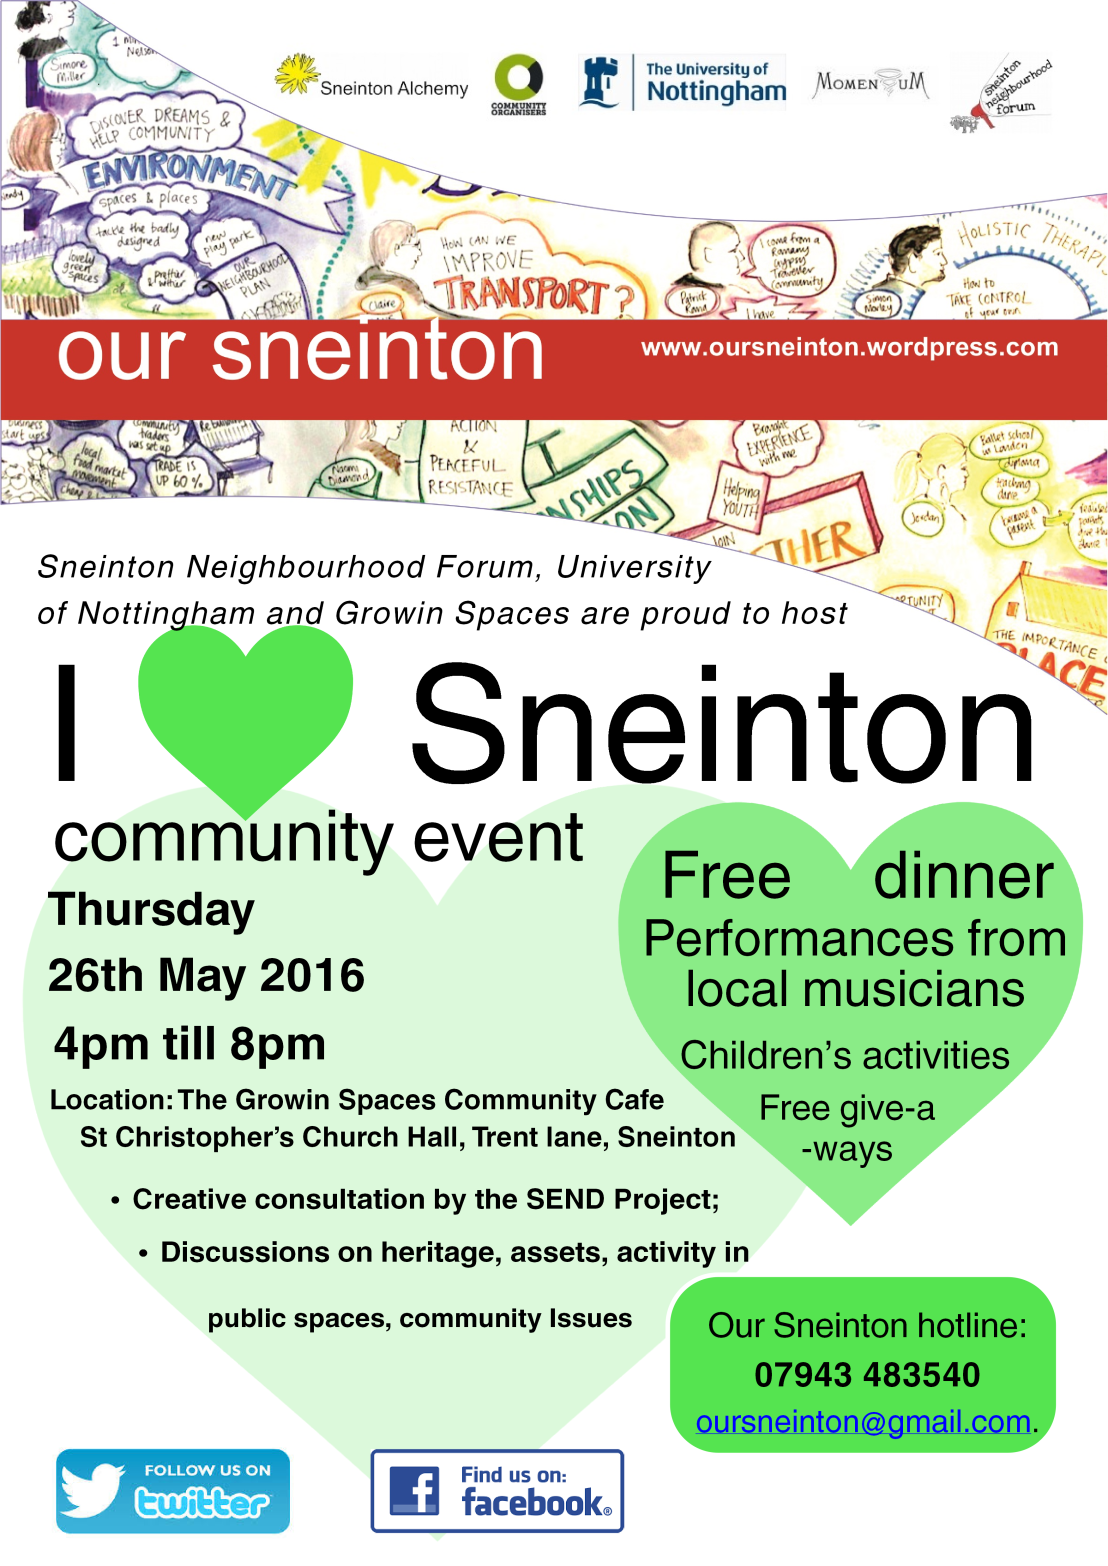 Our sneinton May event